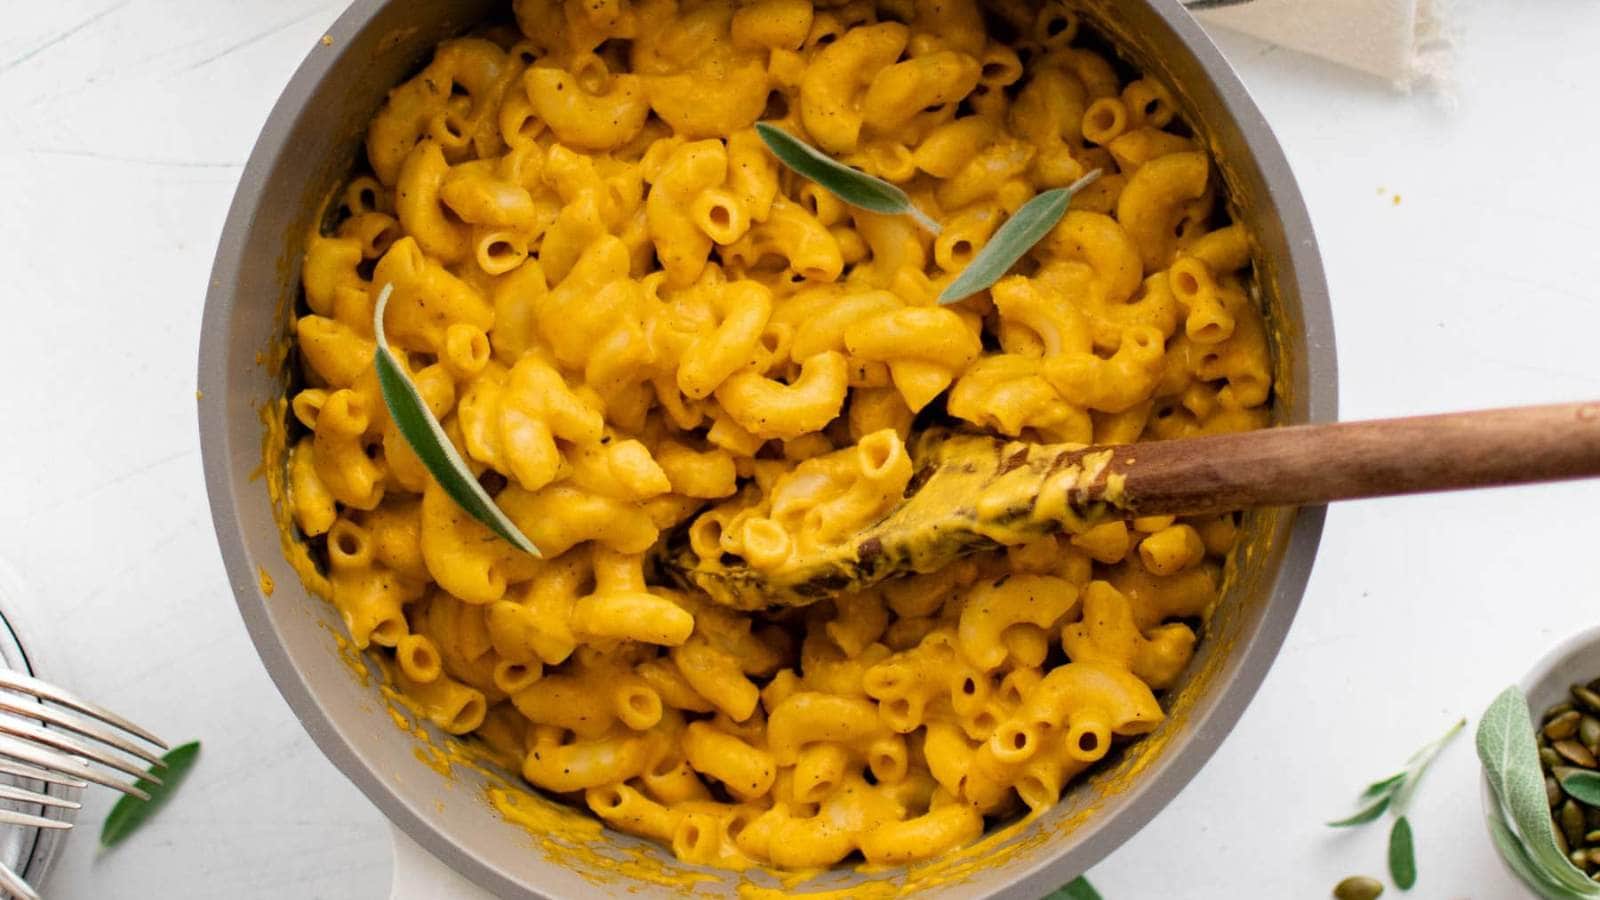 Pumpkin Mac and Cheese recipe by Yellow Bliss Road.